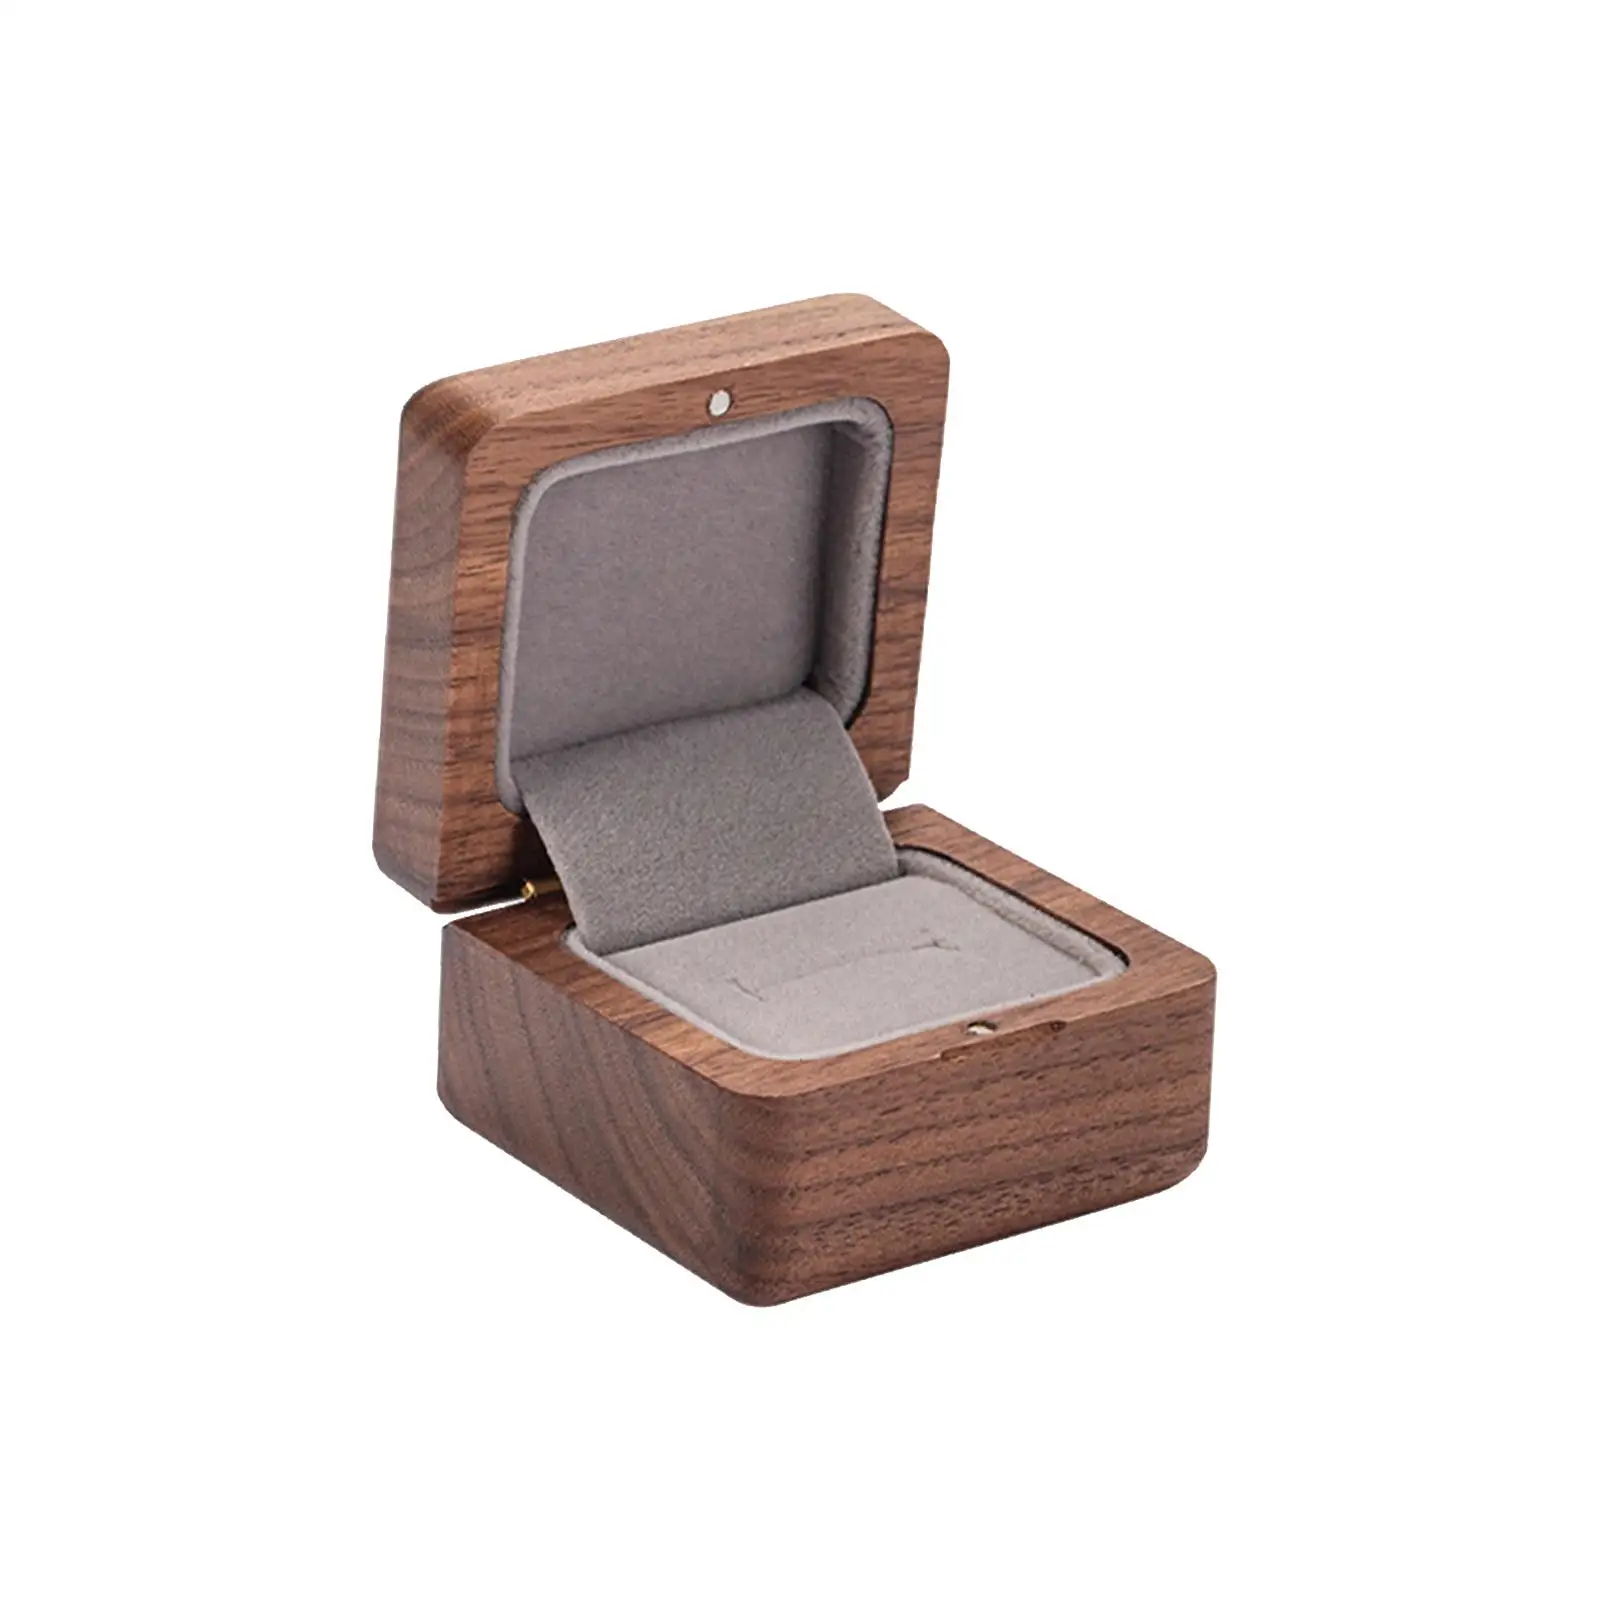 Wooden Ring Box Personalized Handmade Wooden Ring Case Ring Holder Box for Wedding Anniversary Ceremony Engagement Birthday Gift